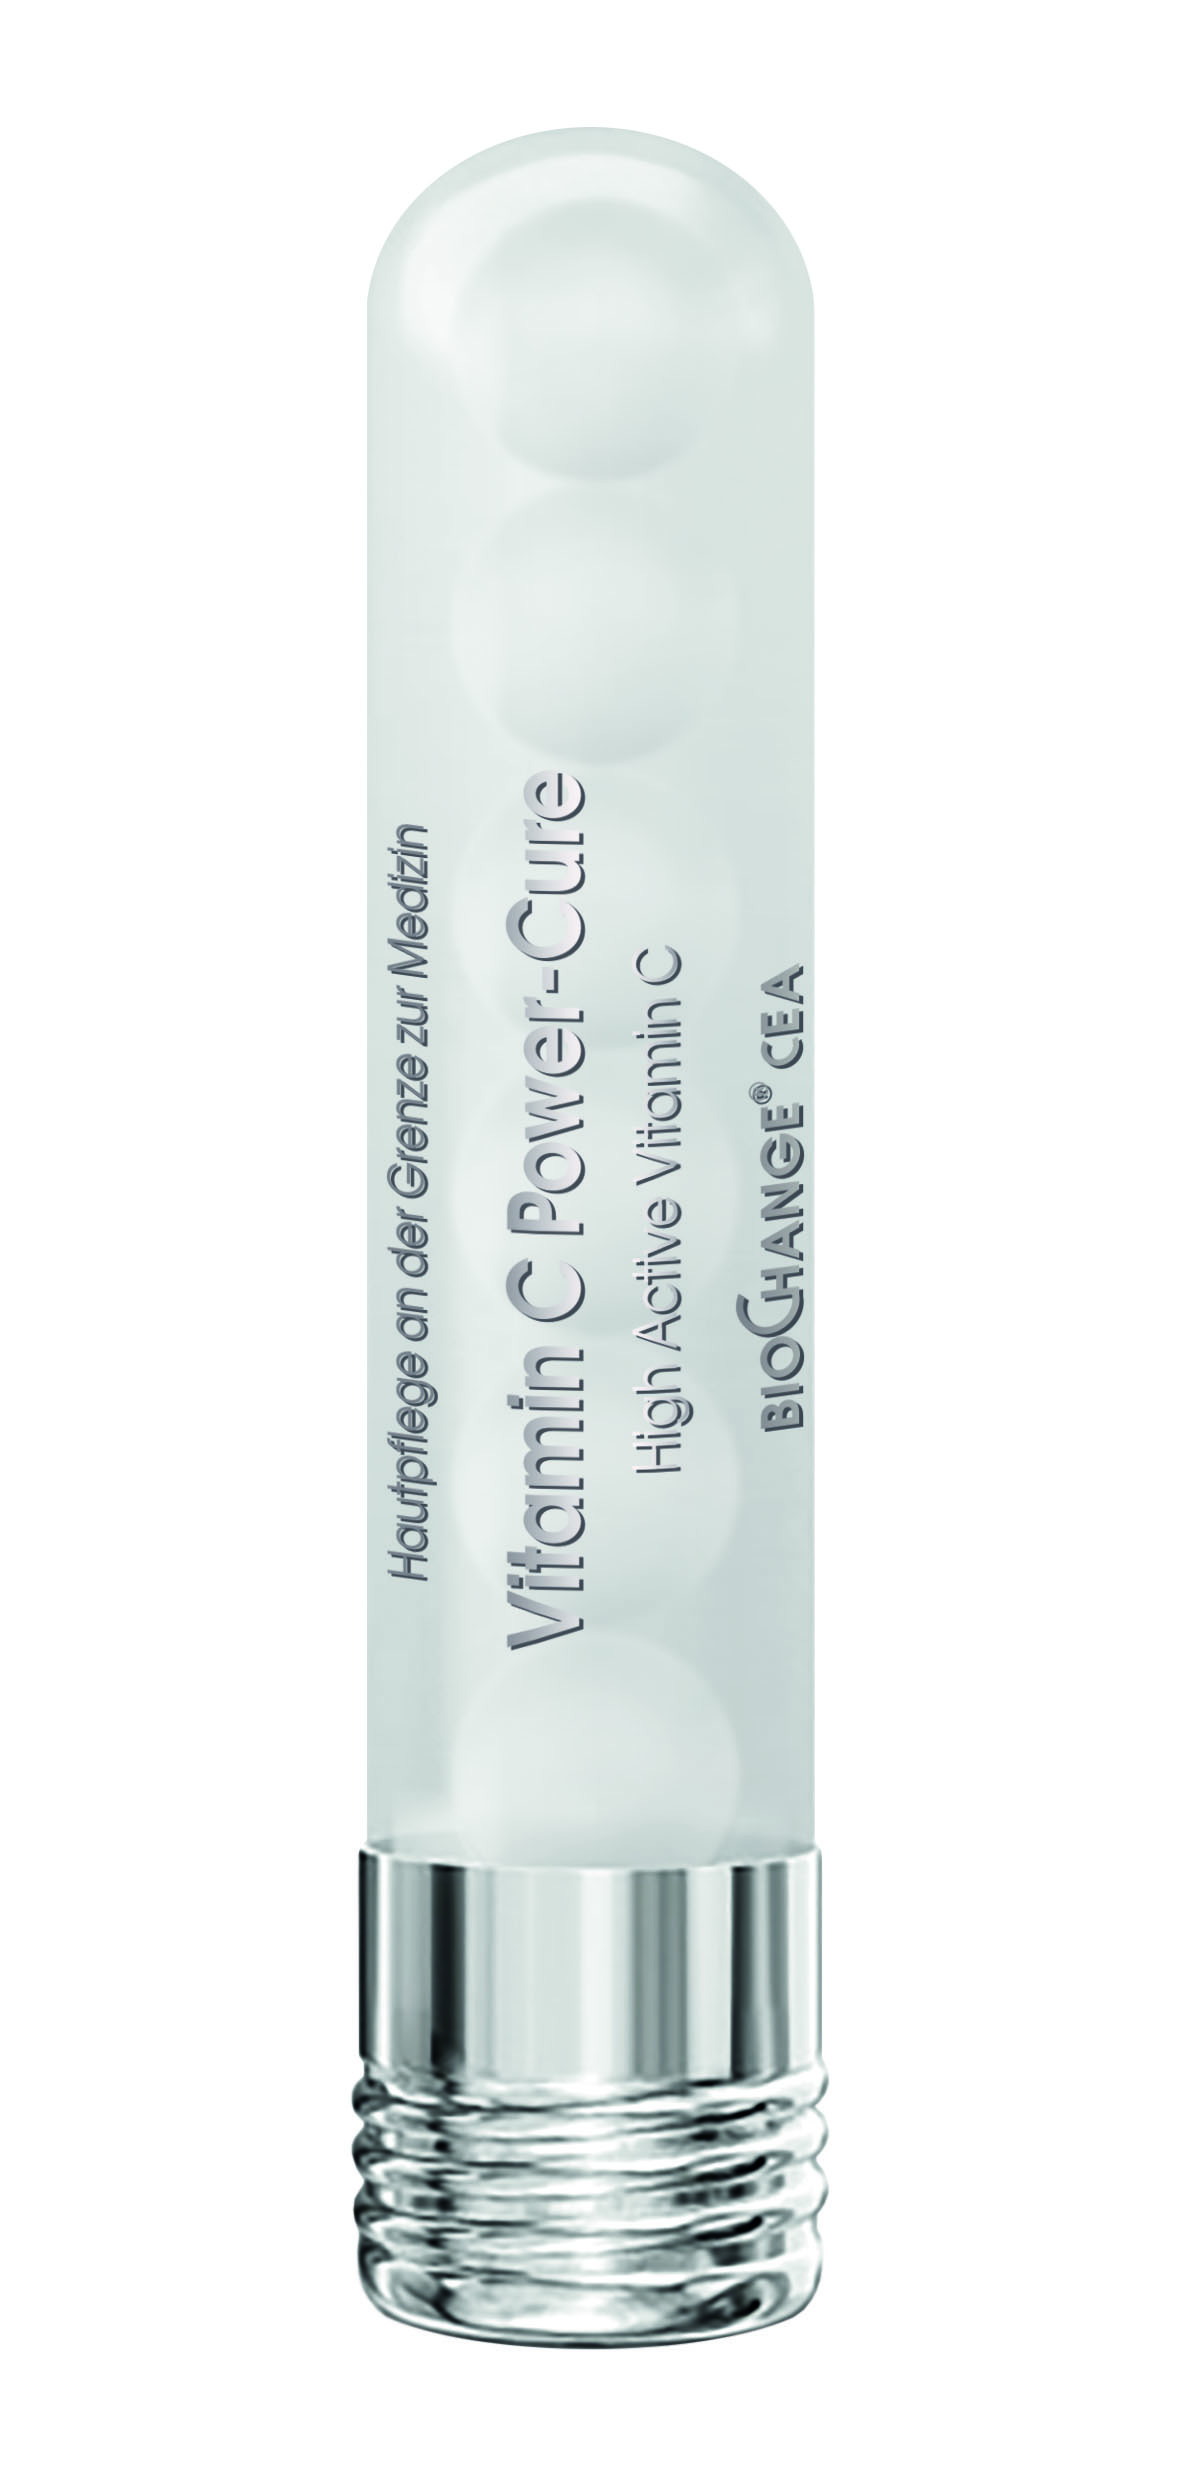 MBR Vitamin C Power Cure High Active Vitamin